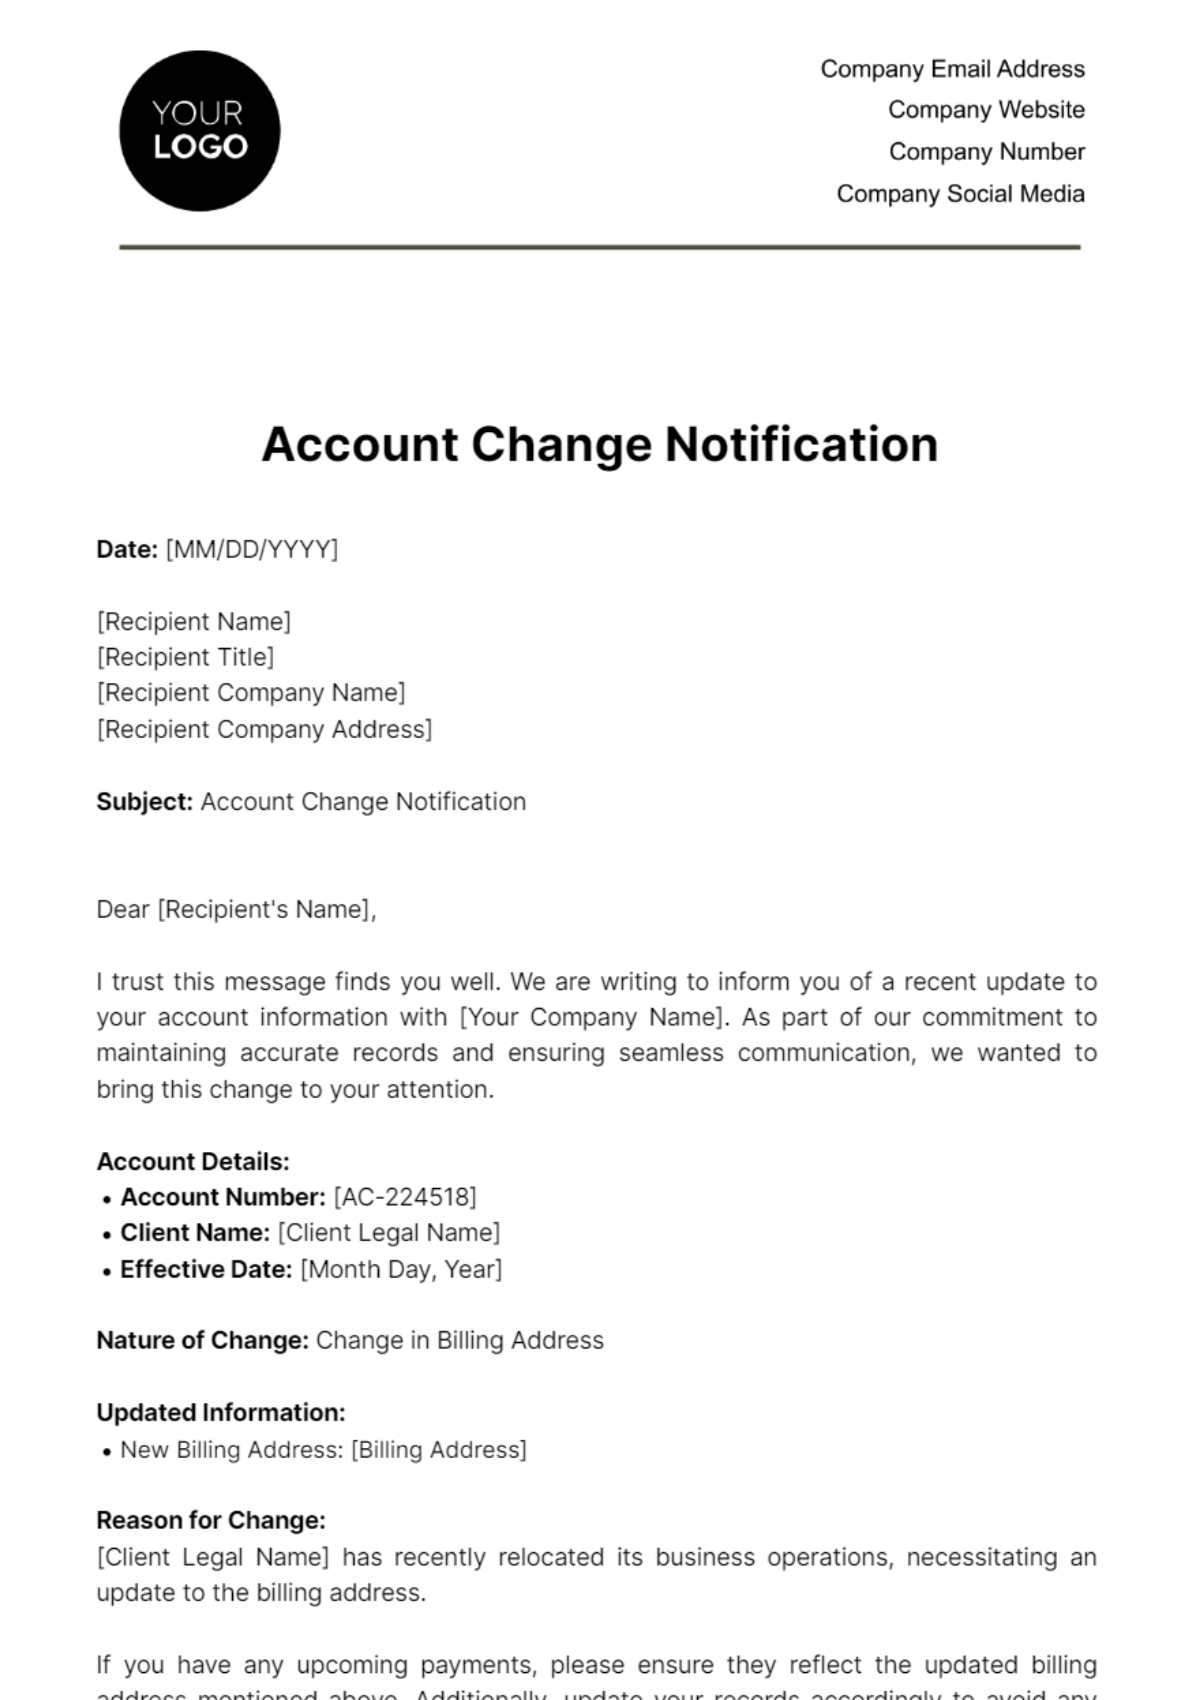 Account Change Notification Template